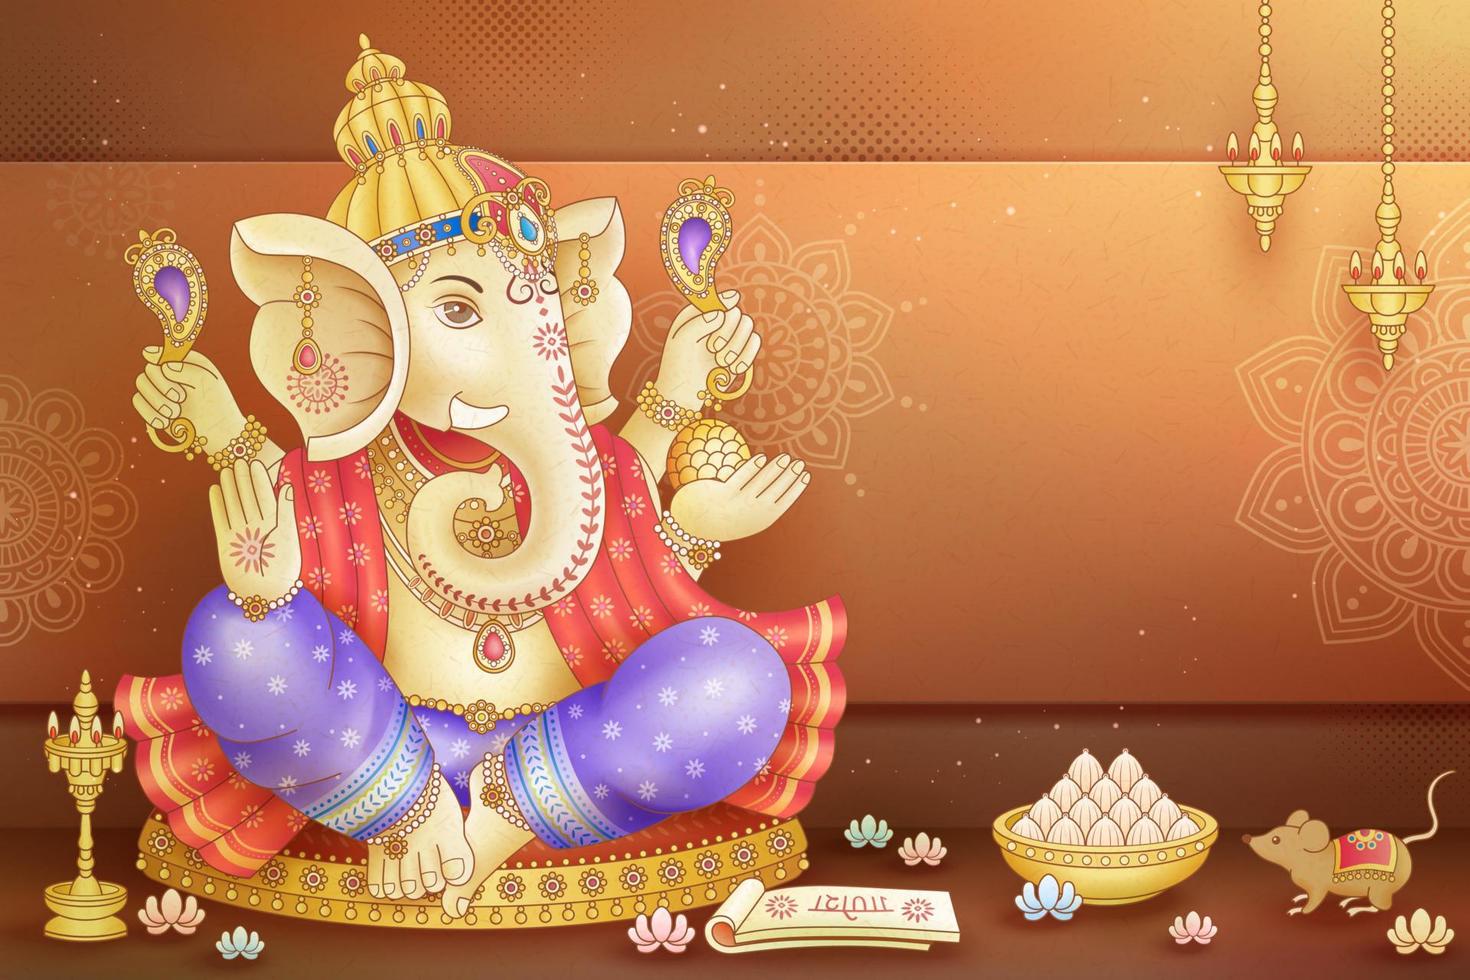 Happy Ganesh Chaturthi design with god Ganesha holding ritual implement on brown background vector